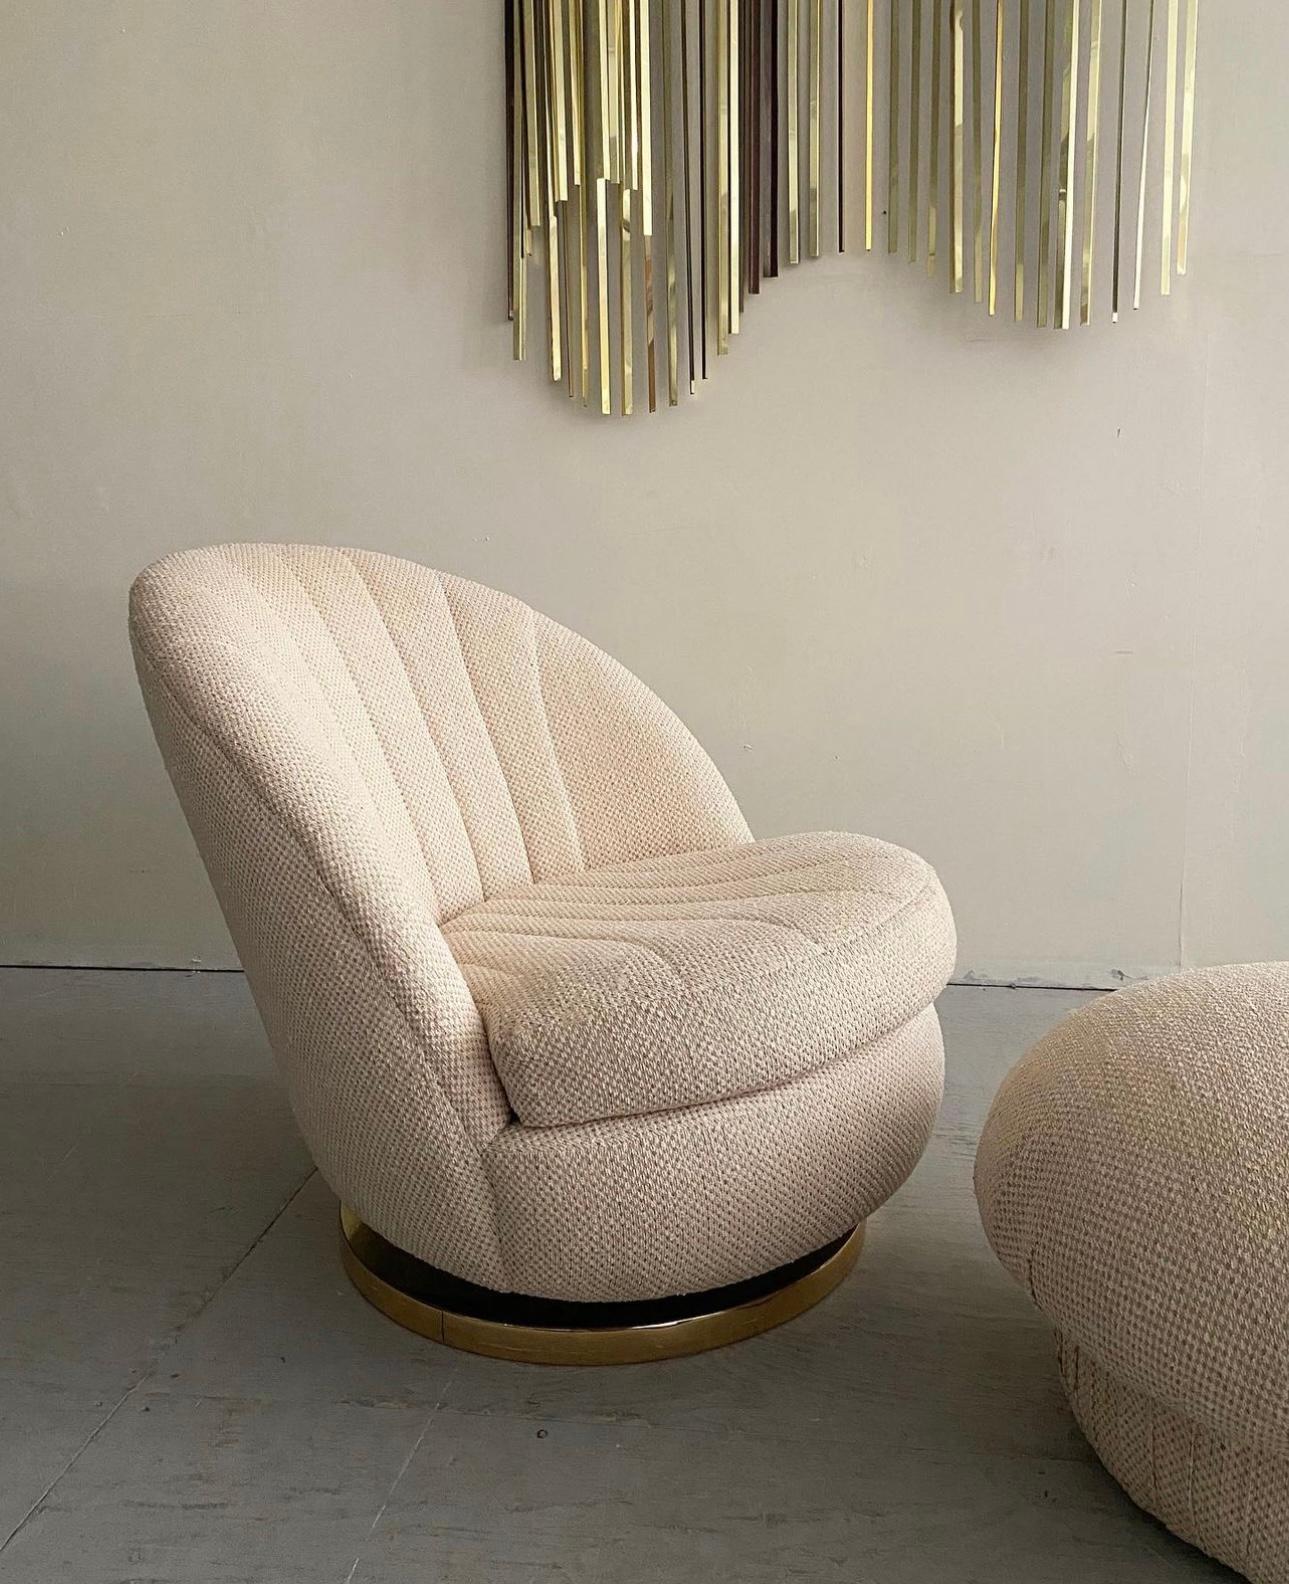 Mid-Century Modern Lounge Chair and Ottoman Designed by Milo Baughman for Thayer Cogginn - 2 Pieces